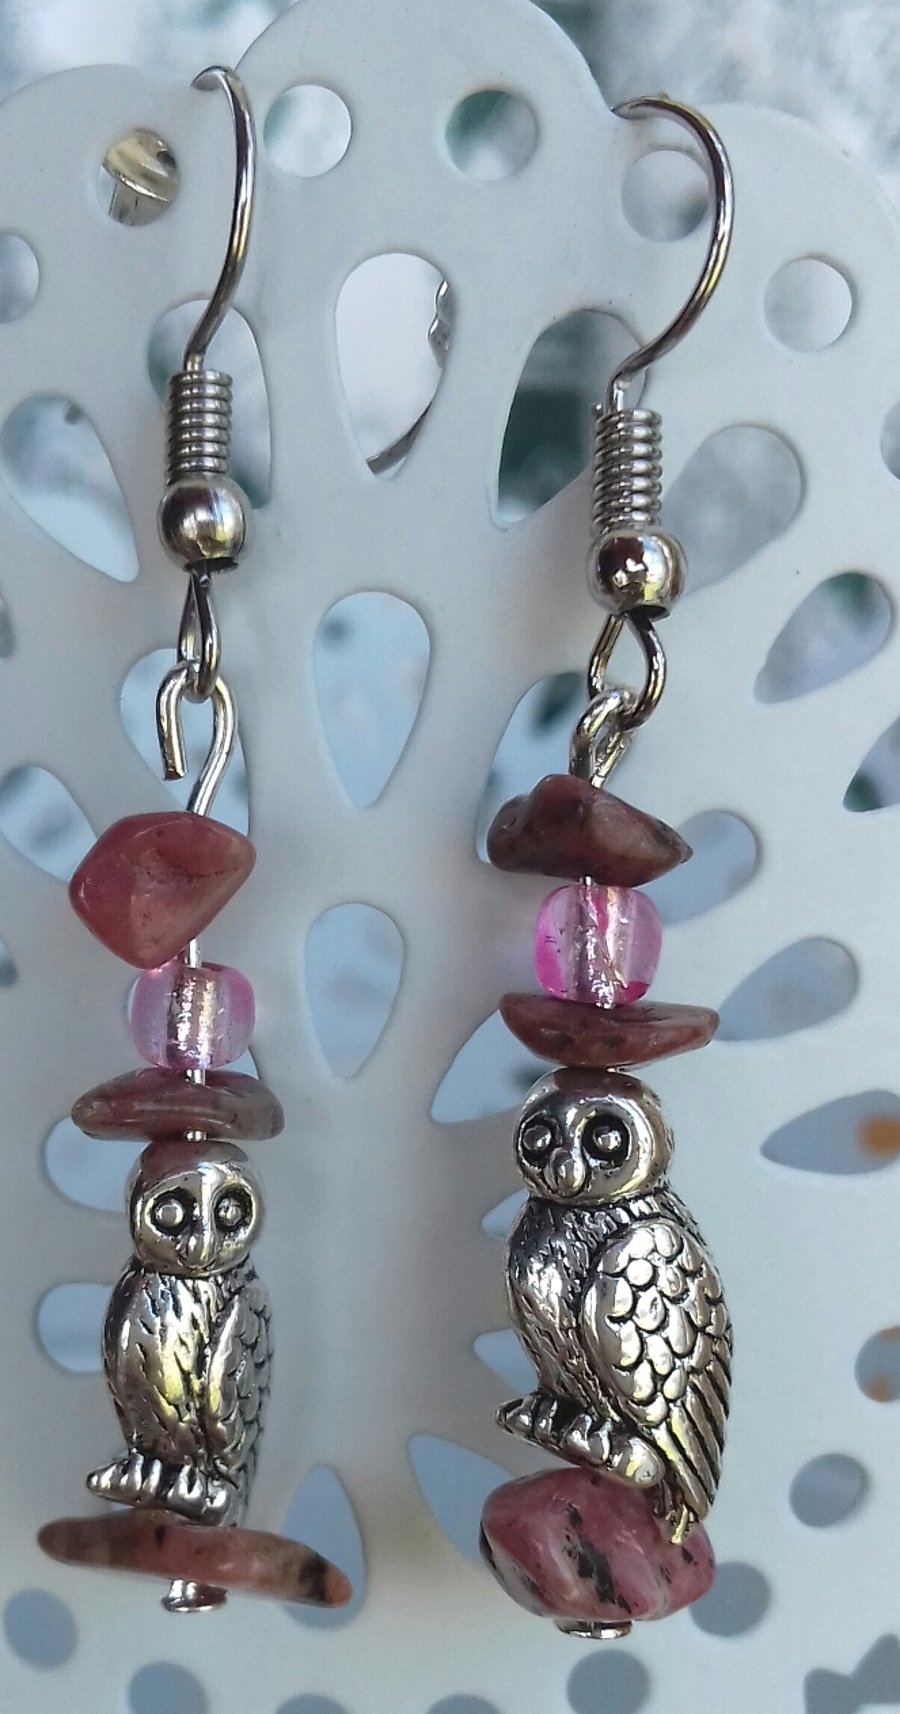 New Owl Earrings: "Silver Owl Perched on a Stone Chip", Unique Design Low Price 